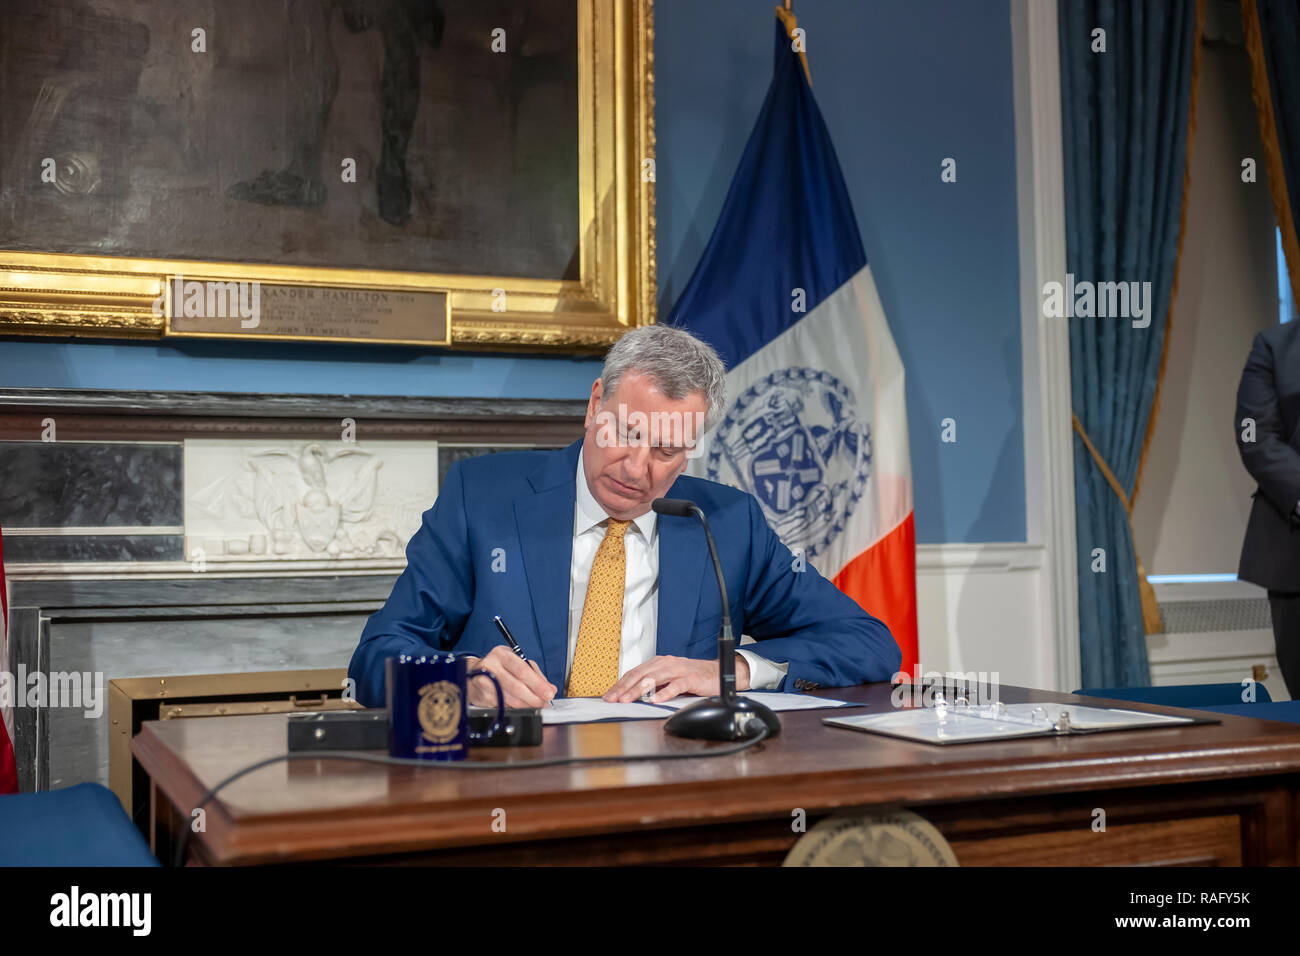 New York Mayor Bill de Blasio at a bill signing in New York City Hall on Wednesday, January 2, 2019. The mayor signed into law legislation that enables stronger campaign finance laws (Intro. 1288) and one that formerly sets the date, February 29, 2019, for the Public Advocate Special Election. (© Richard B. Levine) Stock Photo